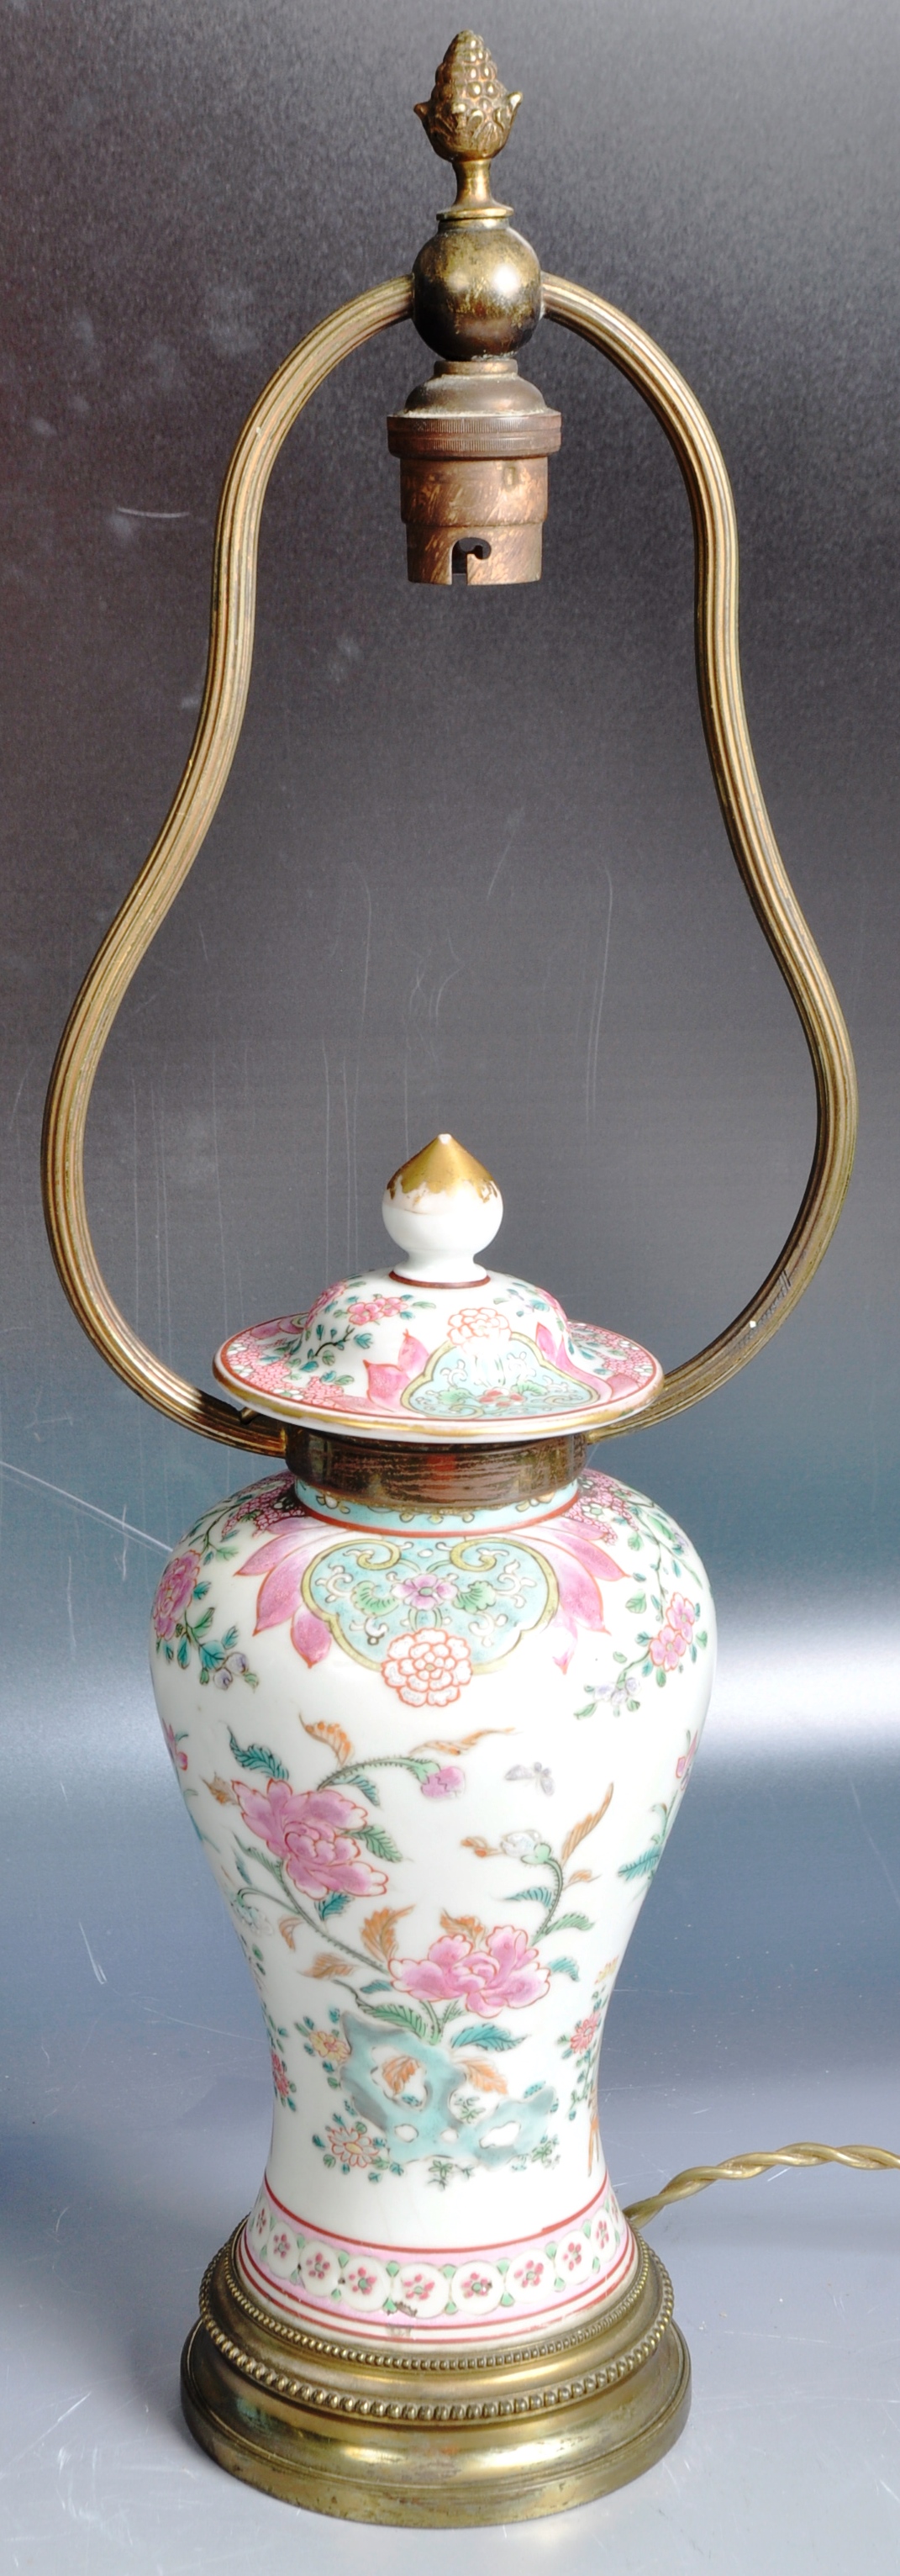 EARLY 20TH CENTURY CHINESE REPUBLIC PERIOD VASE LAMP - Image 2 of 10